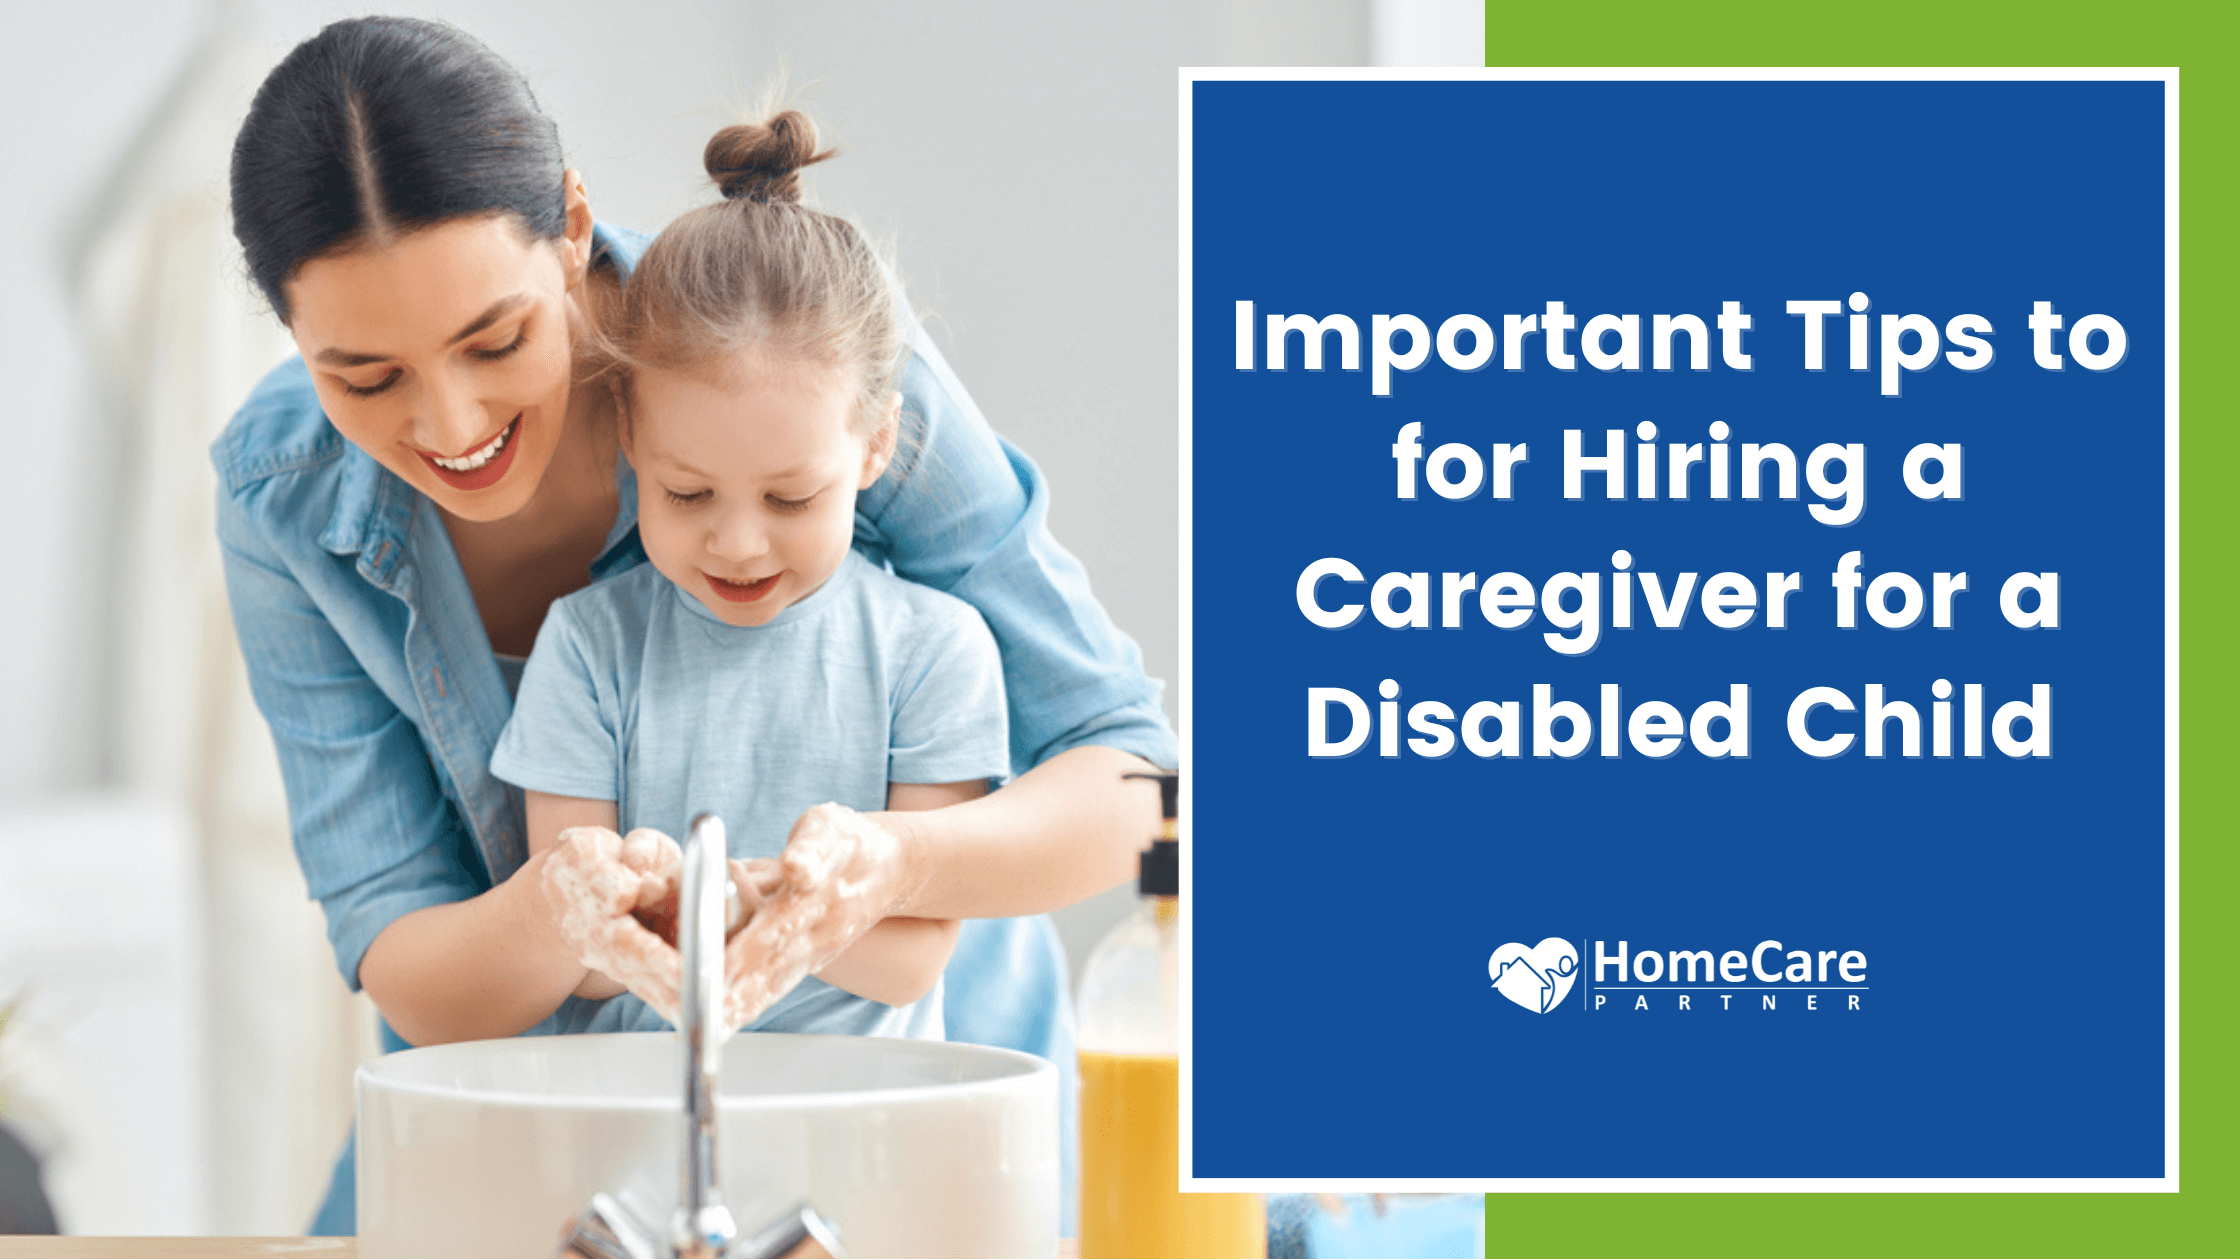 Important Tips to Keep in Mind When Hiring a Caregiver for a Disabled Child